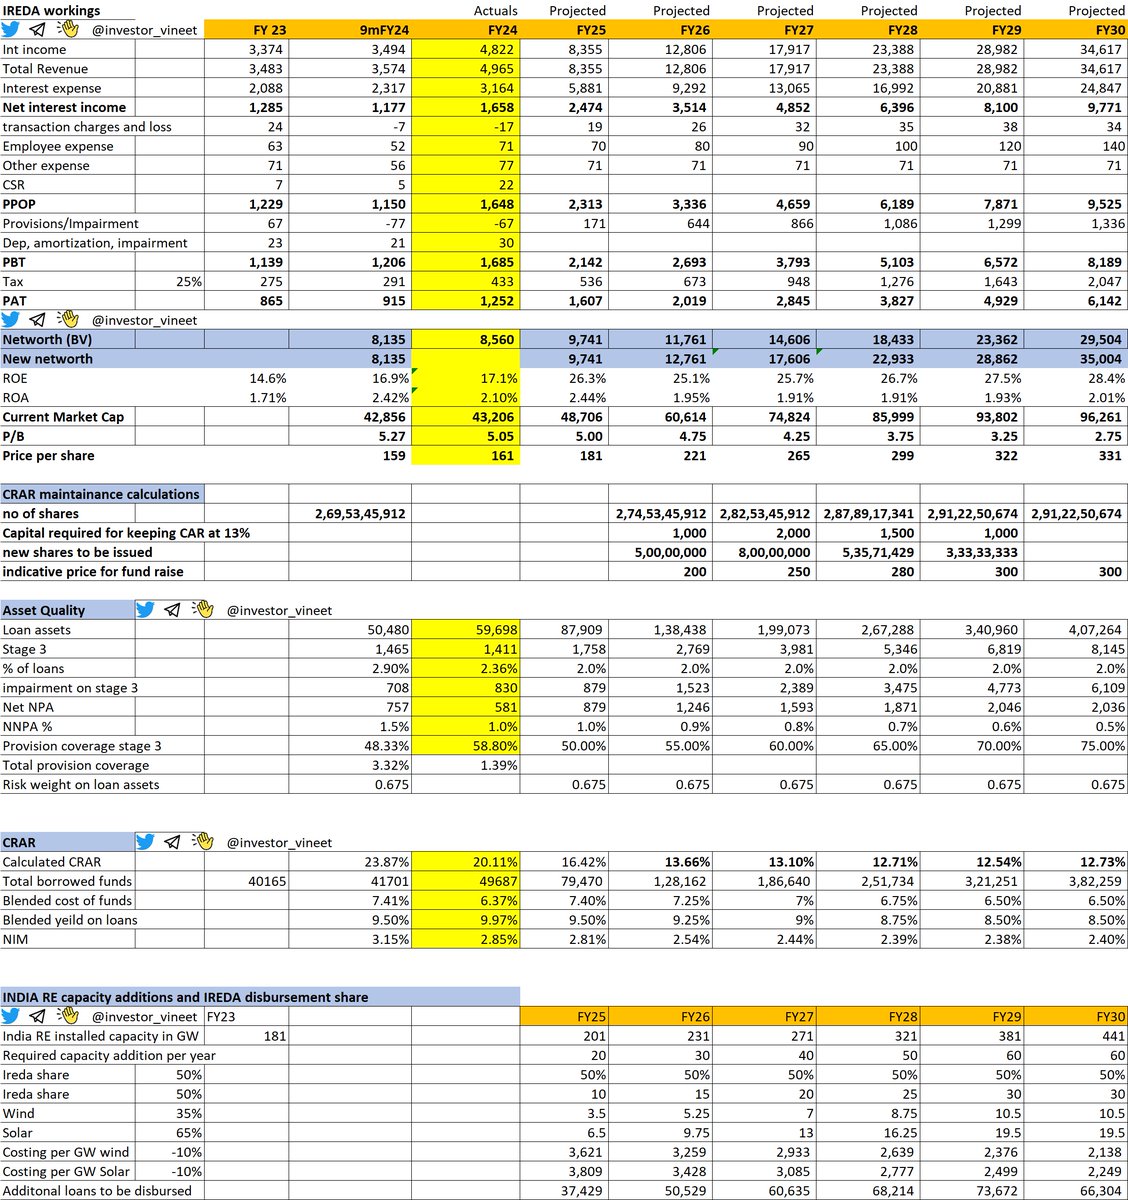 #IREDA 
Numbers on expected line
Highlighted in yellow column in below screenshot
Key things to note:

-RoE improvement

-Loan asset growth (18% QoQ) (from 50k to 59k cr)

-GNPA / NNPA aligning slowly with projections

-CRAR falling inline with projections as ROE (17%) is way